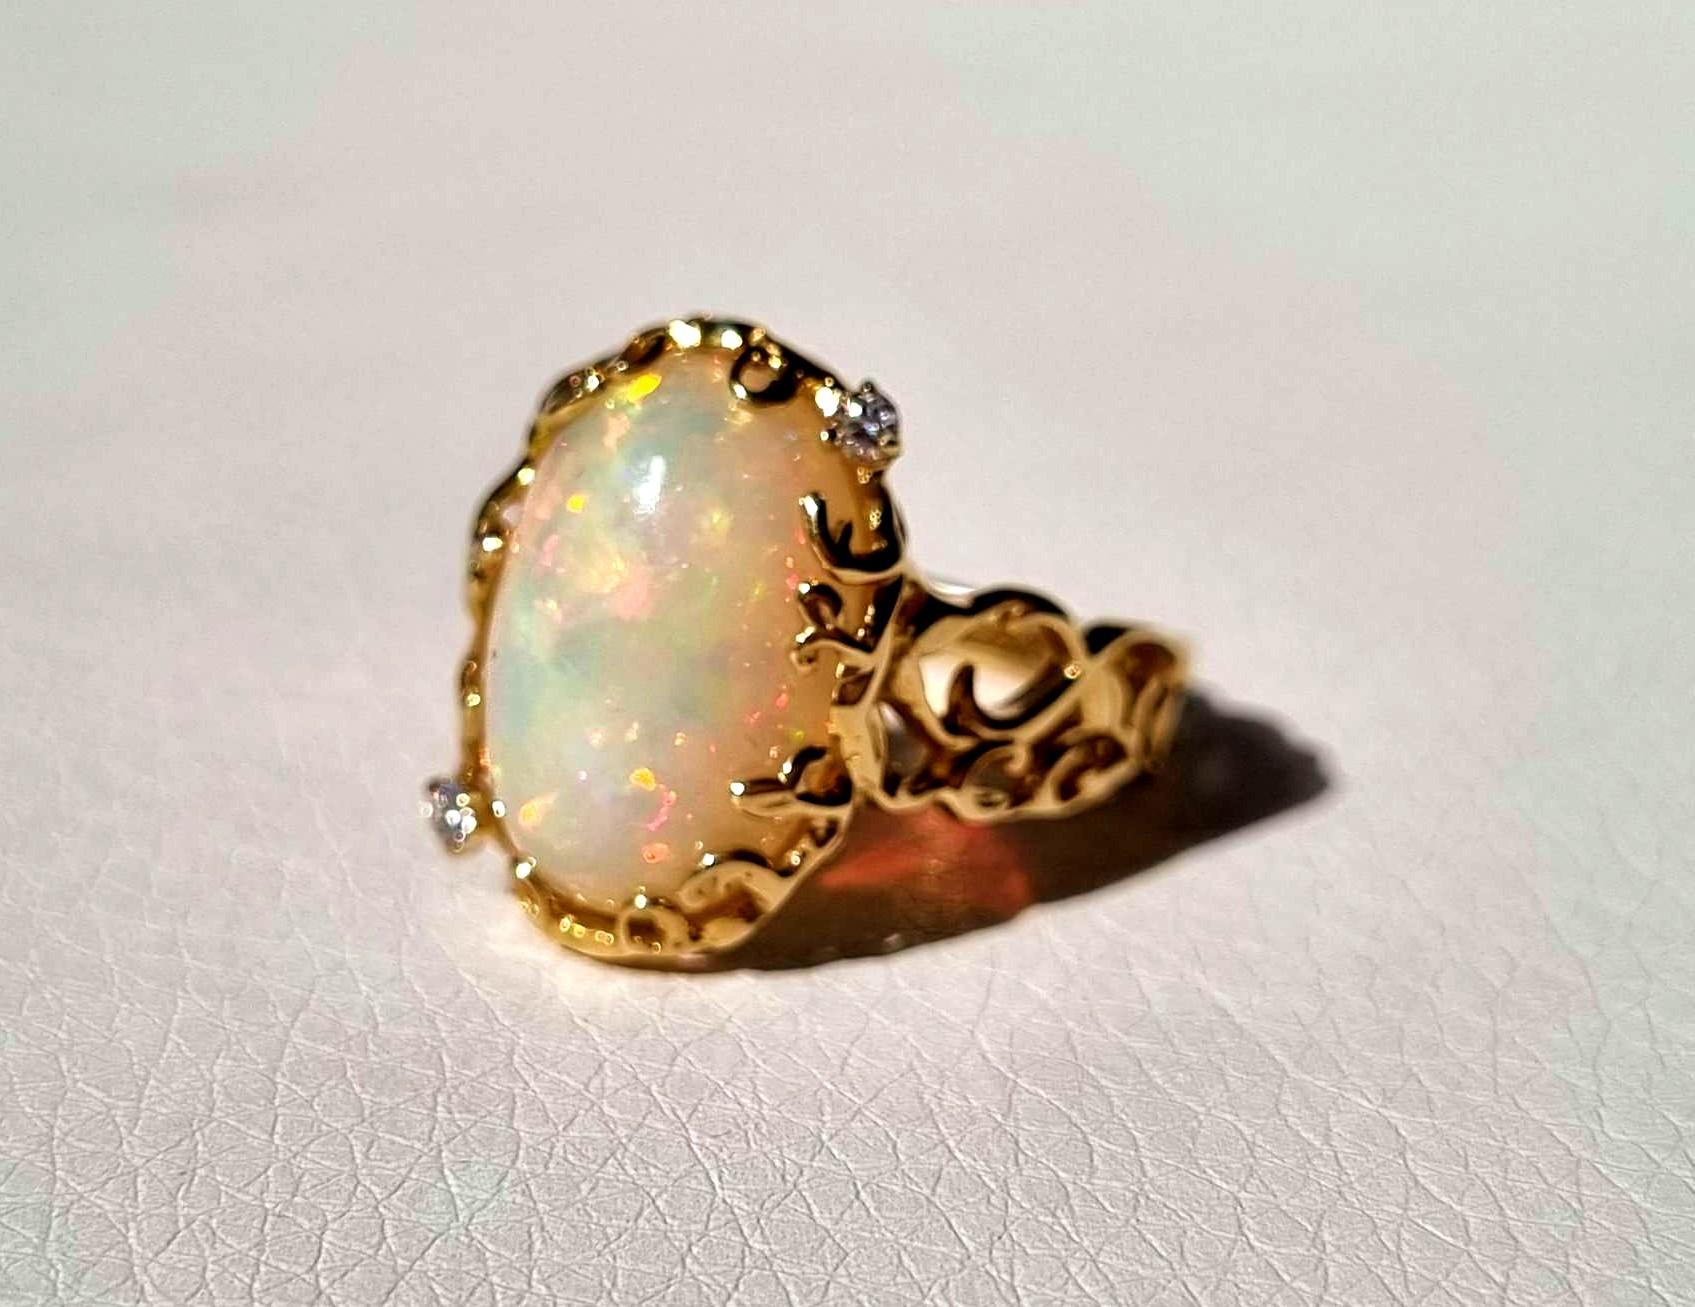 Oval Cut 6.5 ct Ethiopian Opal and Diamonds Cocktail Floral Ring